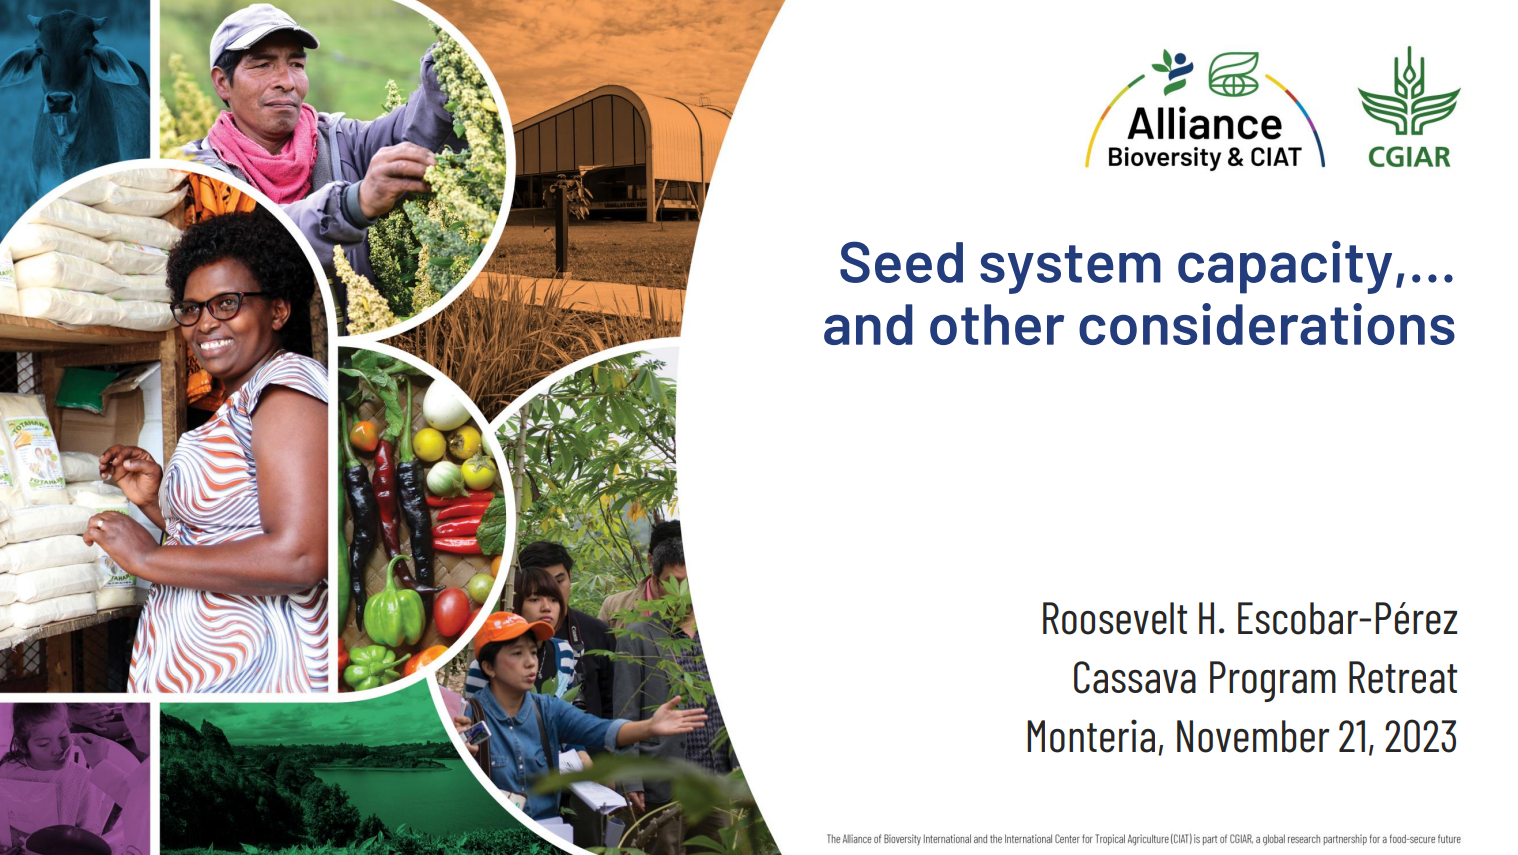 Seed system capacity and other considerations